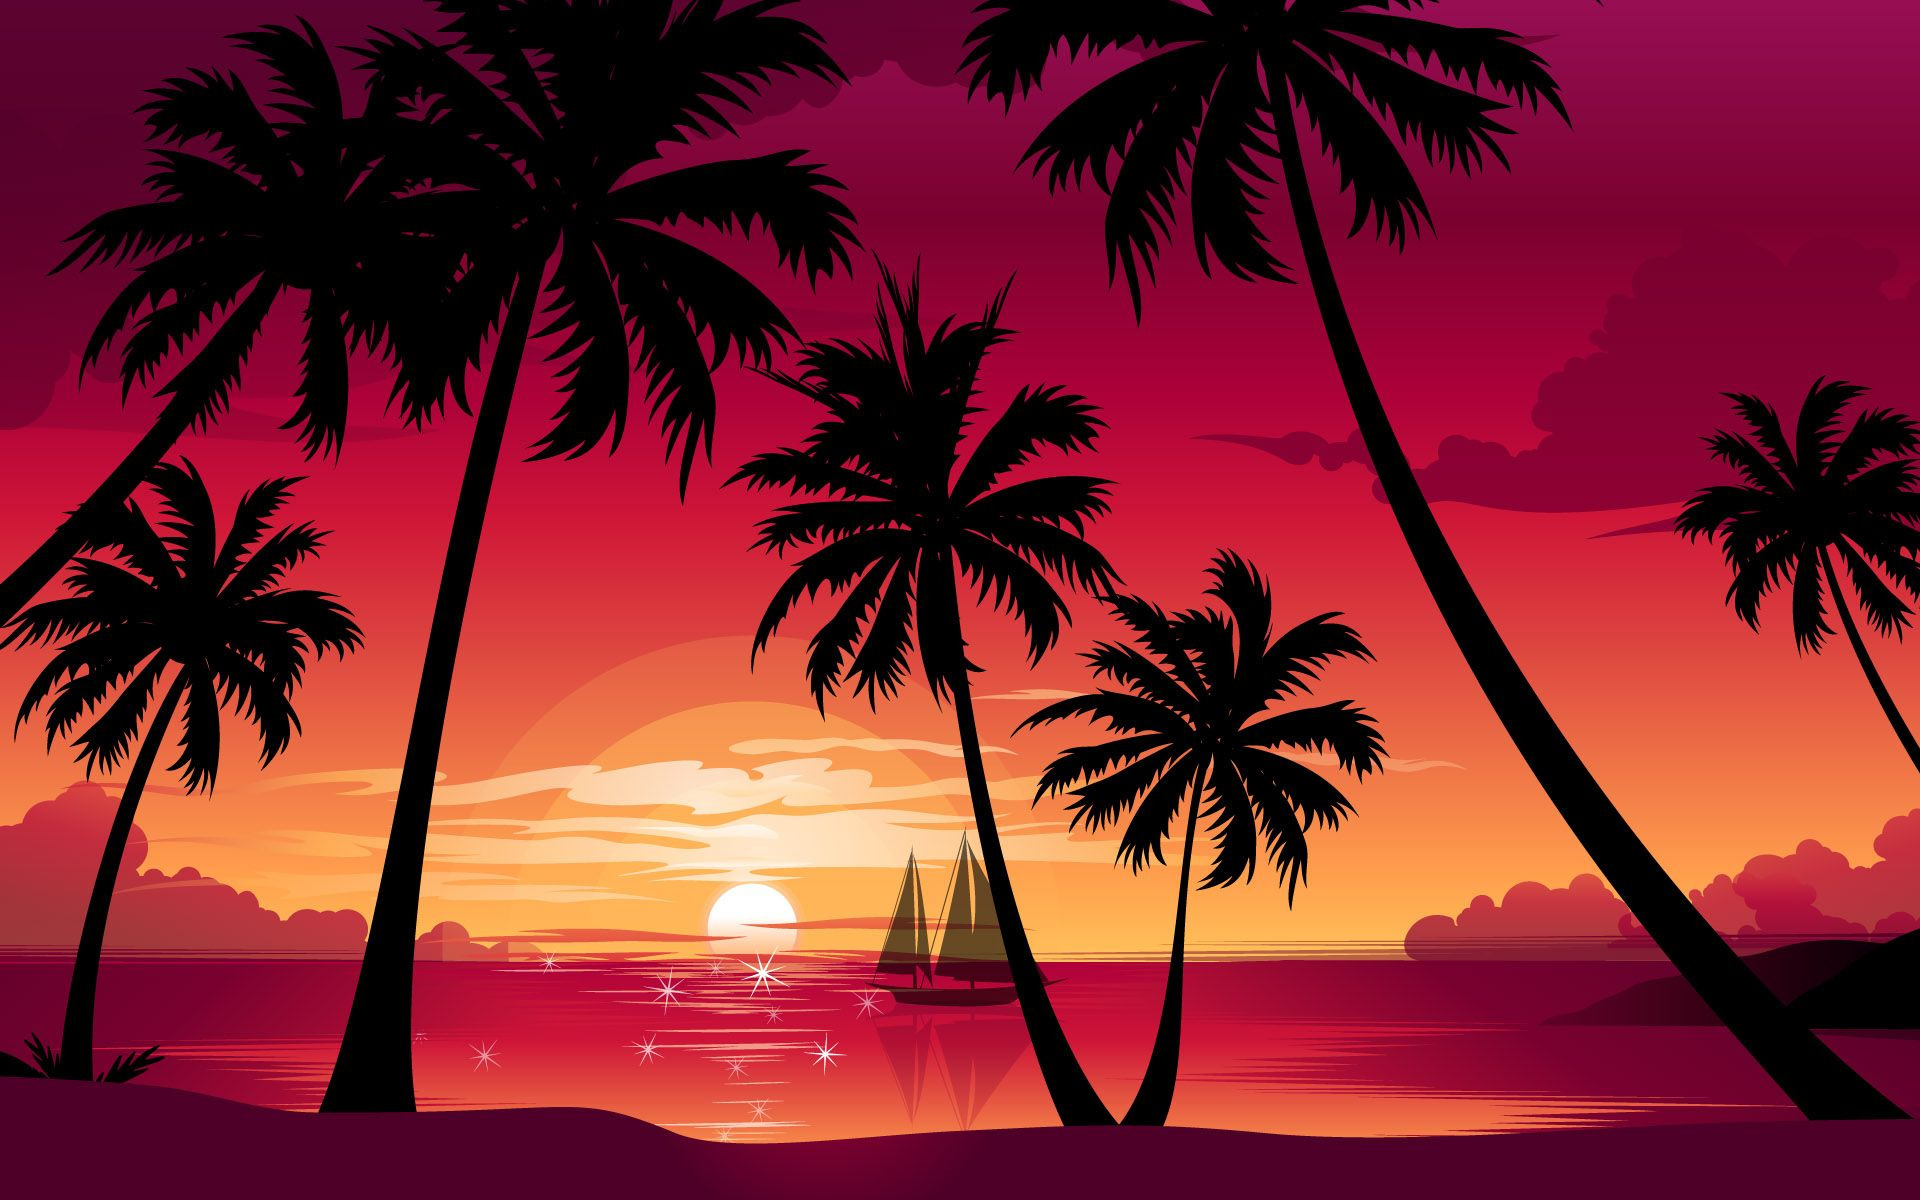 1920x1200 Not as cool as I thought it was, but still worthy enough to be on this AWESOME board!! (: | Tree sunset wallpaper, Palm tree sunset, Sunset images